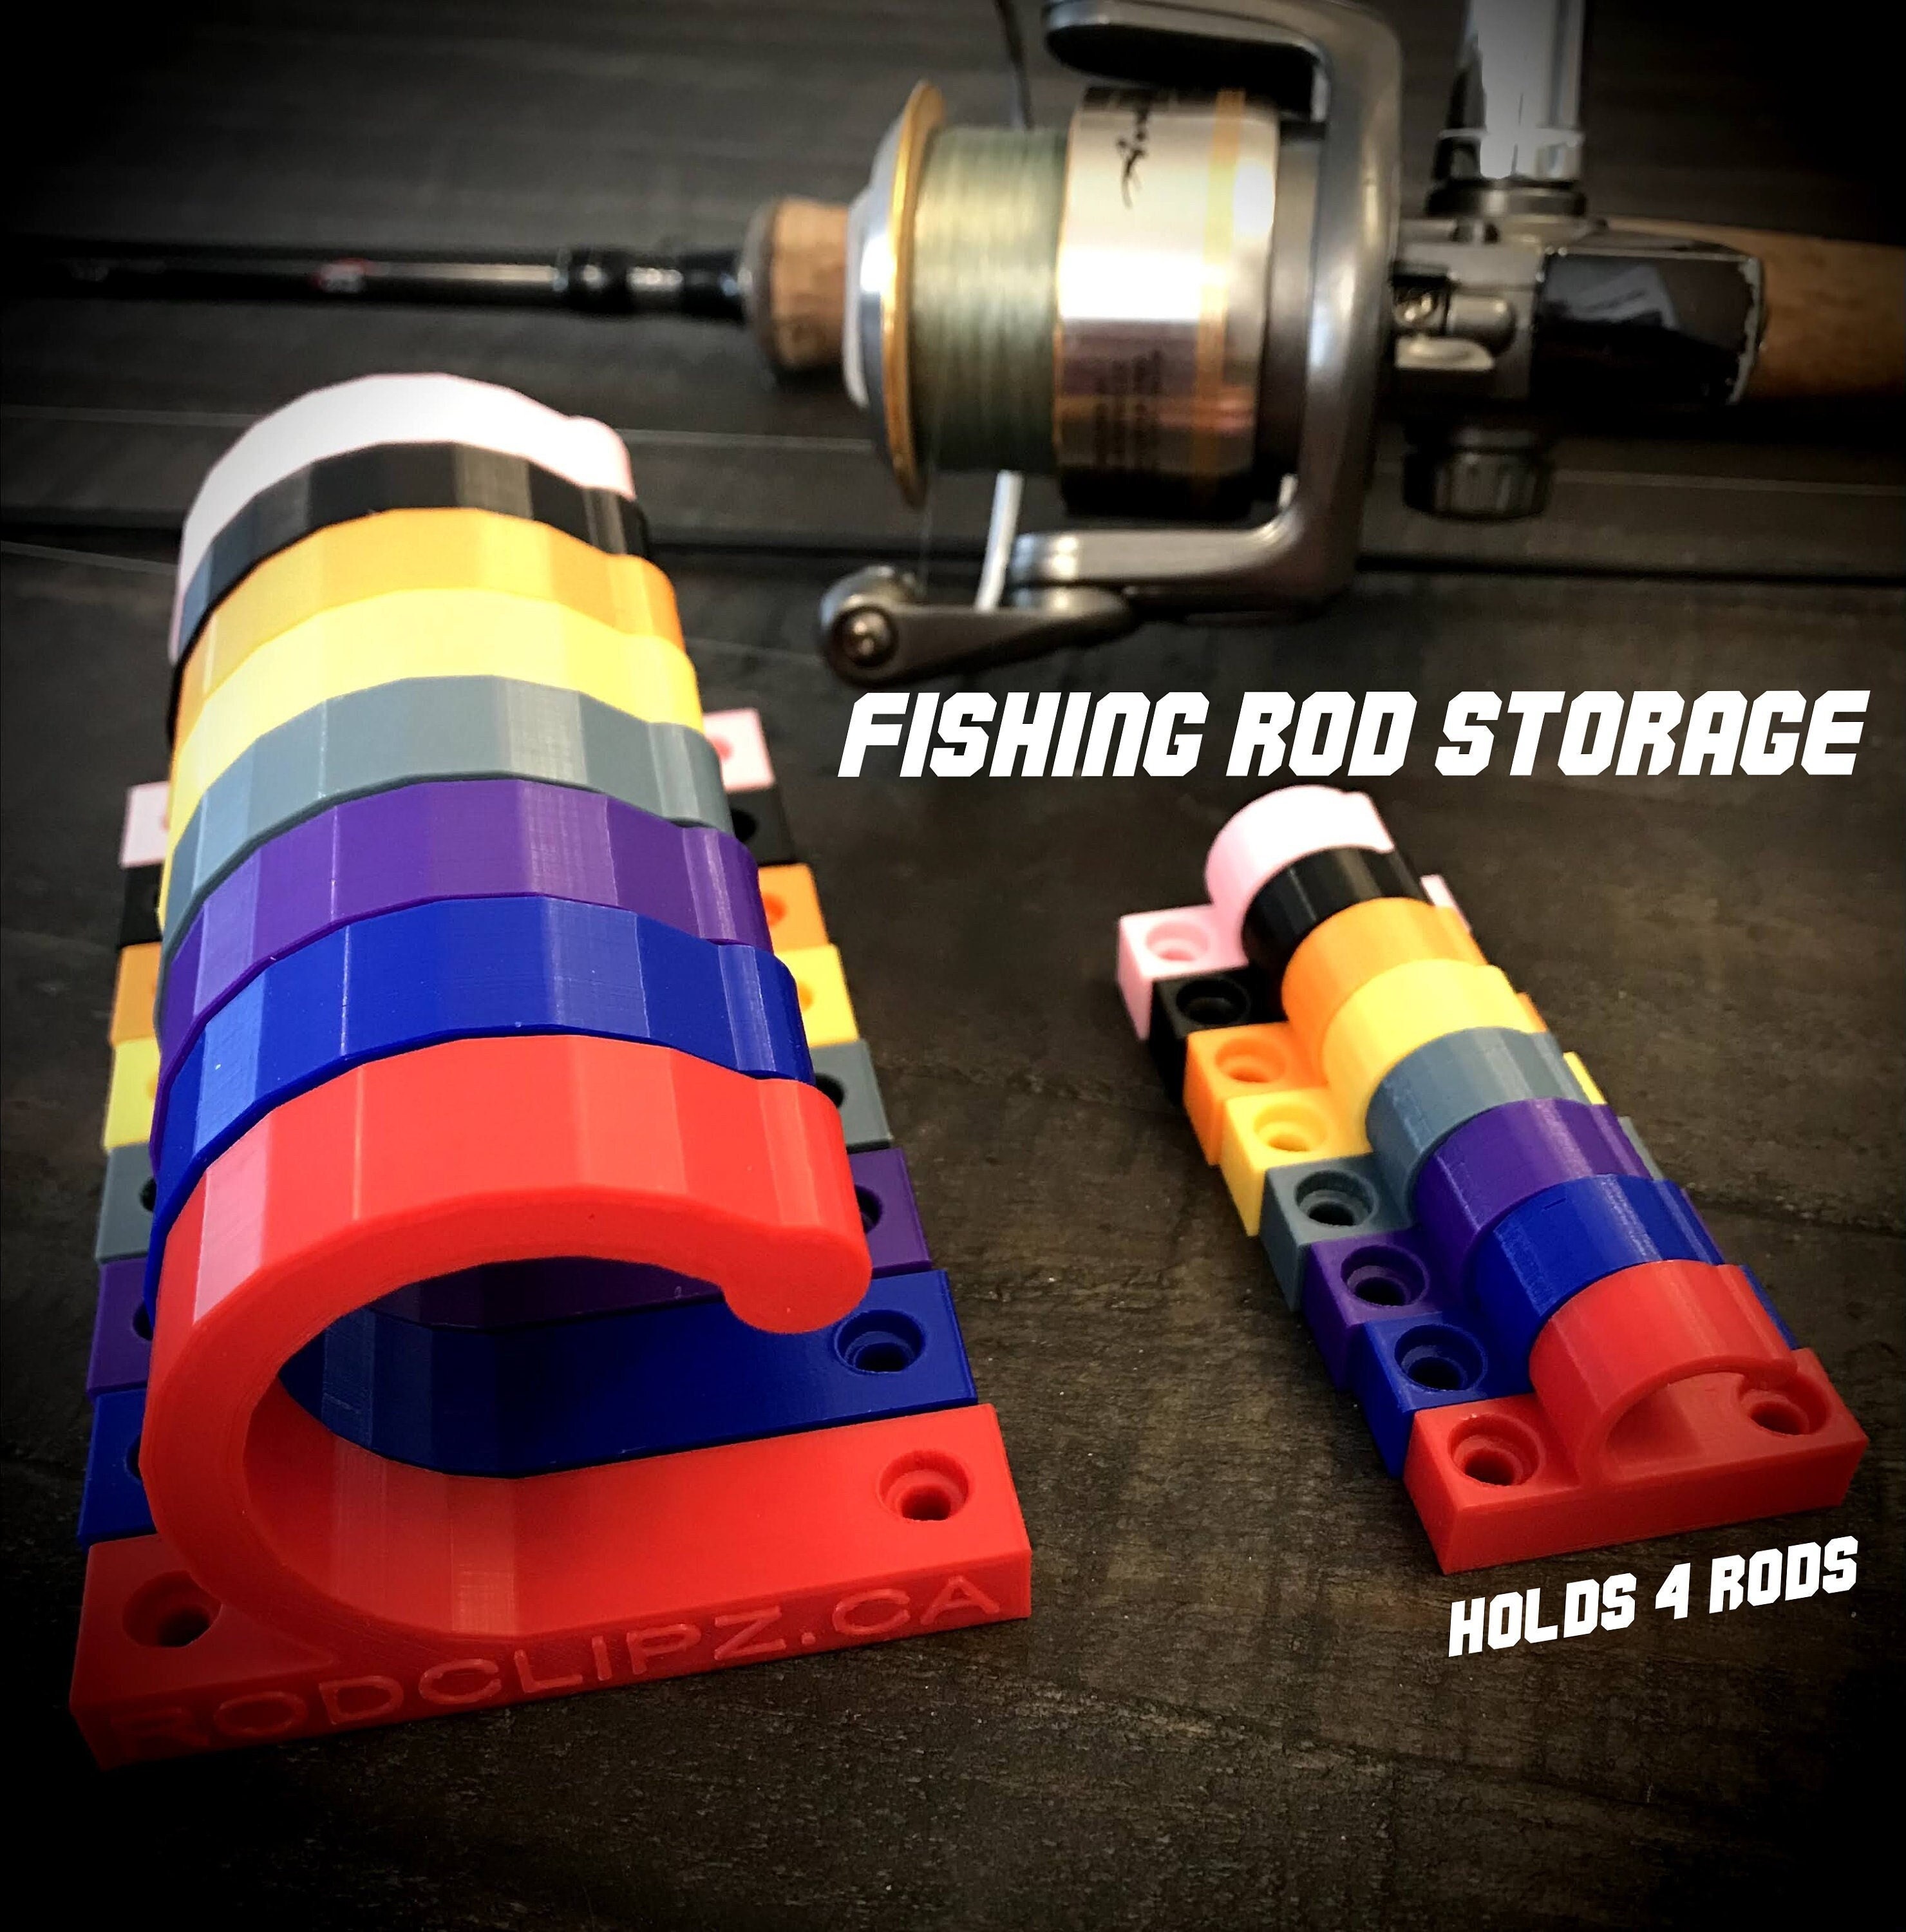 Buy Fishing Rod Storage Online In India -  India